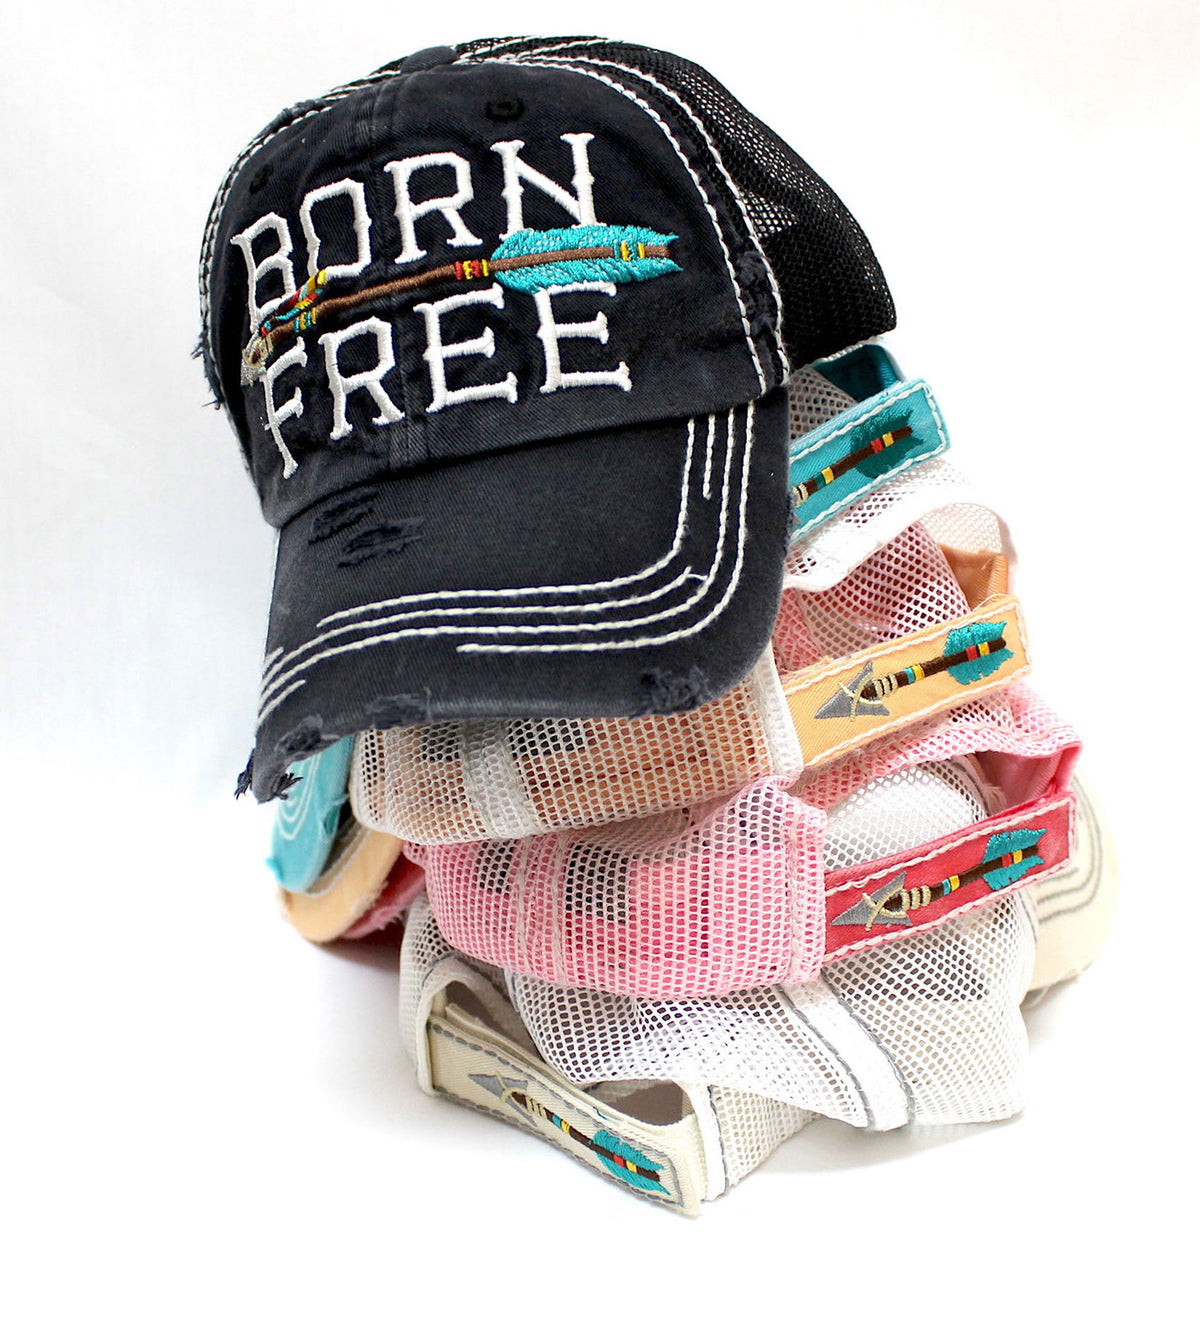 Rose Pink "BORN FREE" Embroidery Mesh-Back Trucker - Caps 'N Vintage 